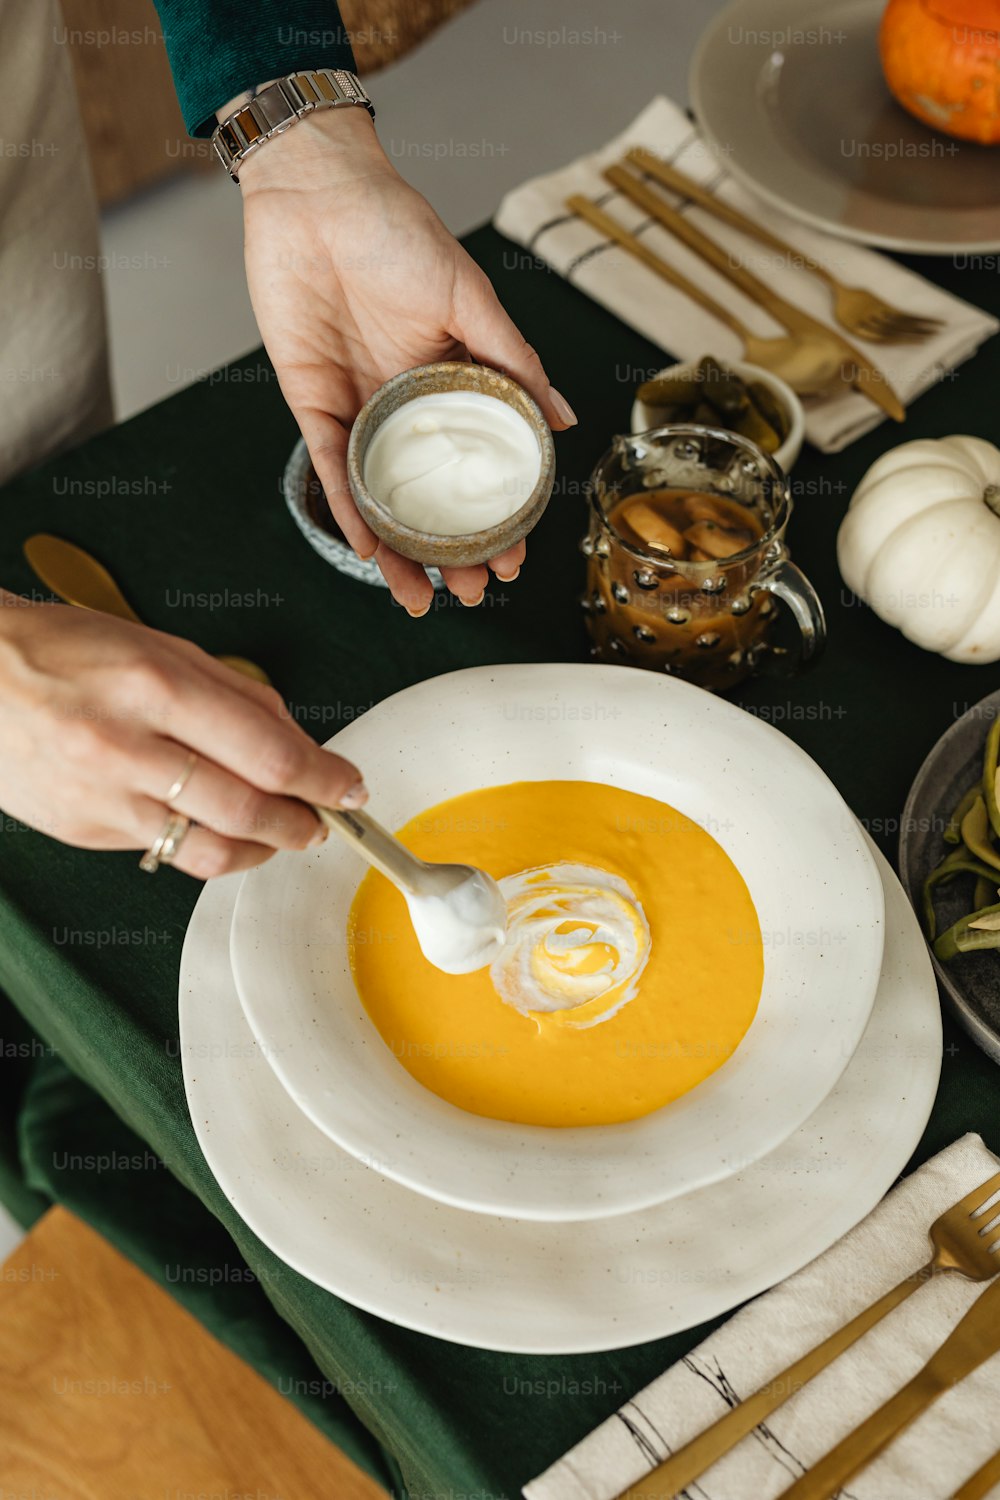 a person dipping a spoon into a bowl of soup